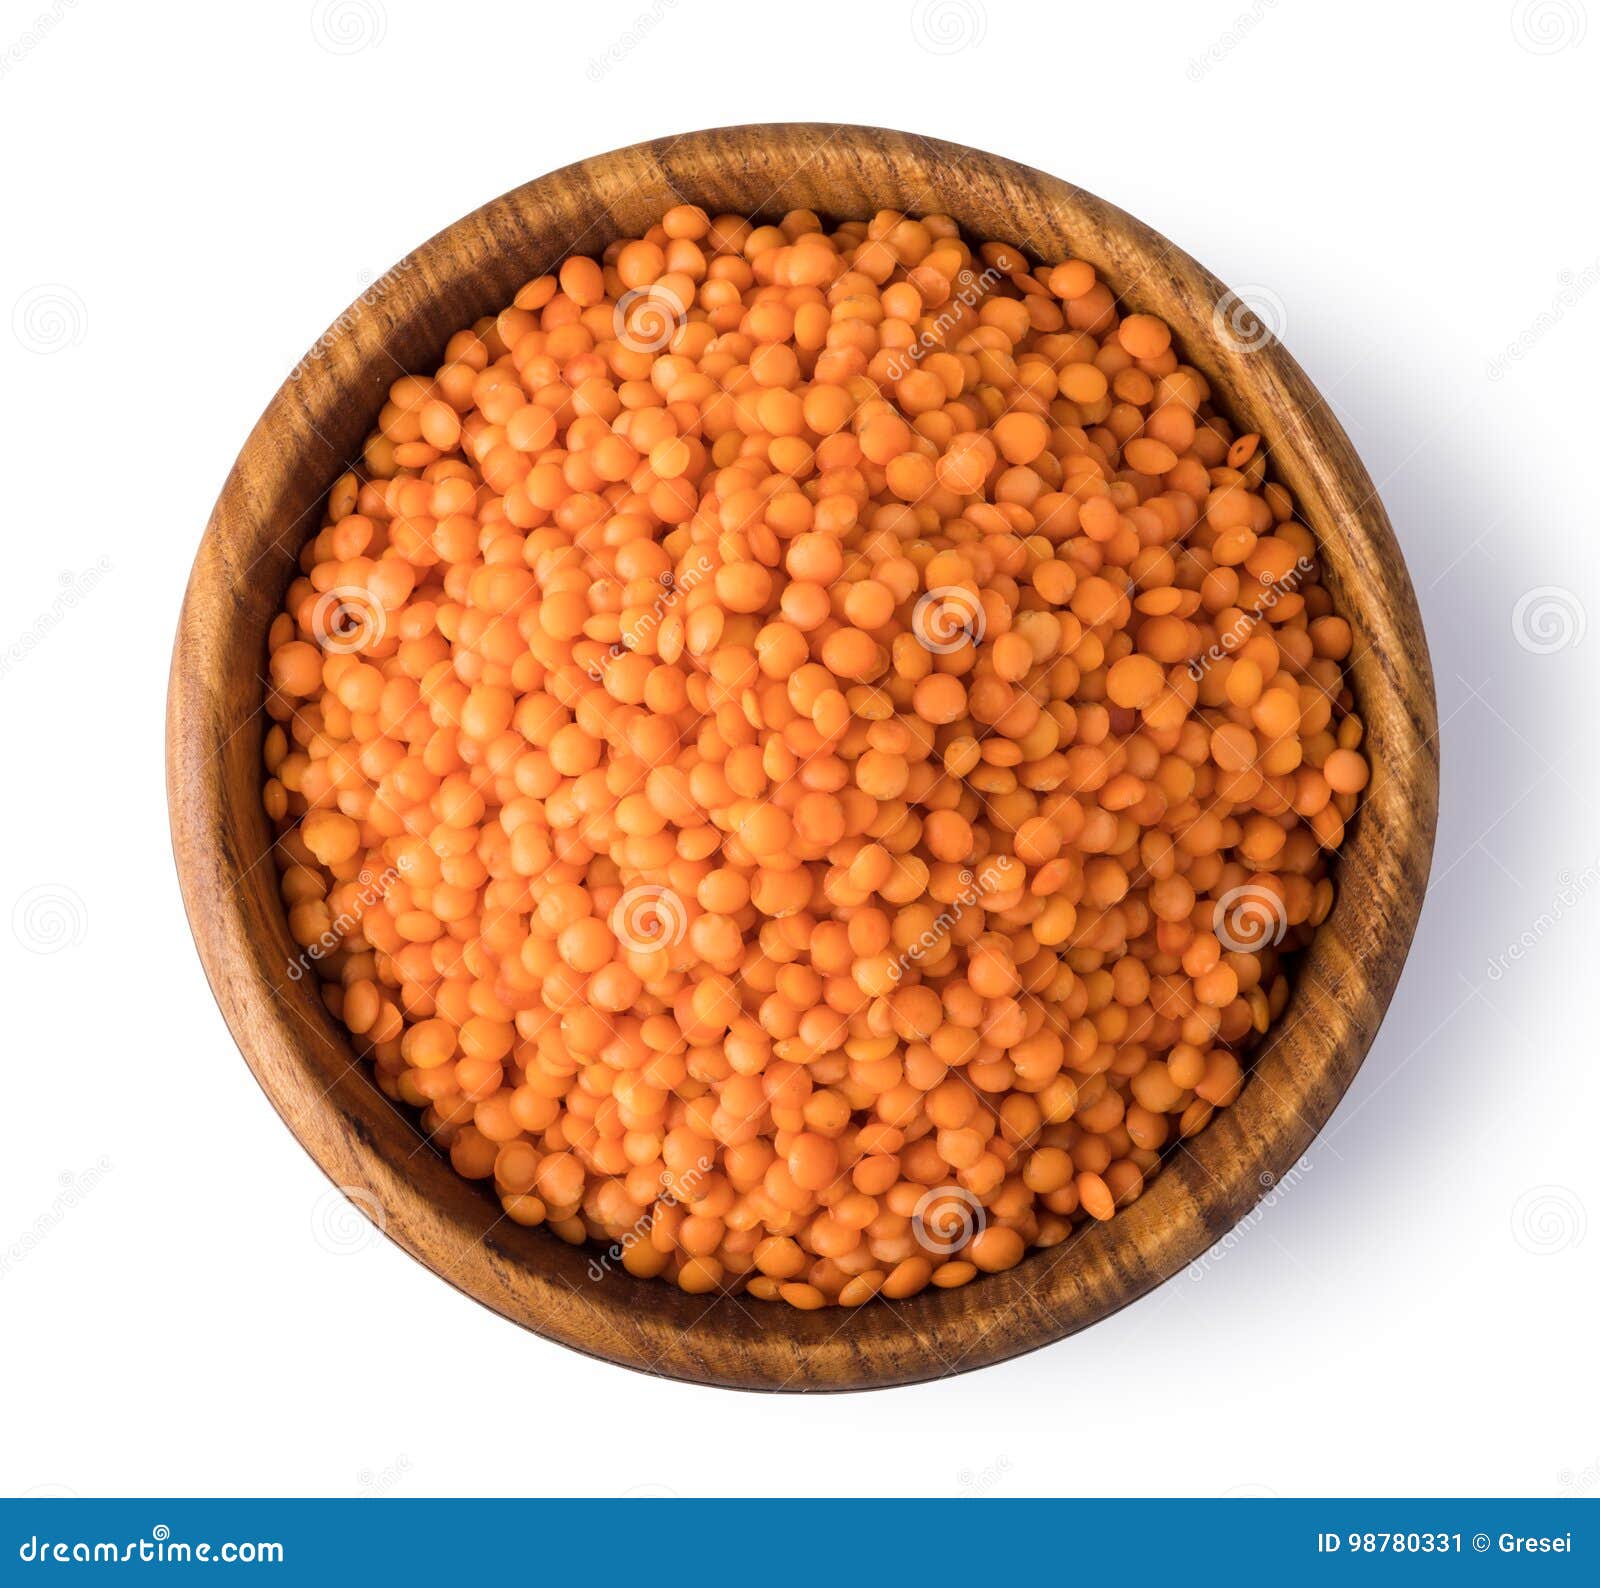 Lentils stock image. Image of background, texture, diet - 98780331